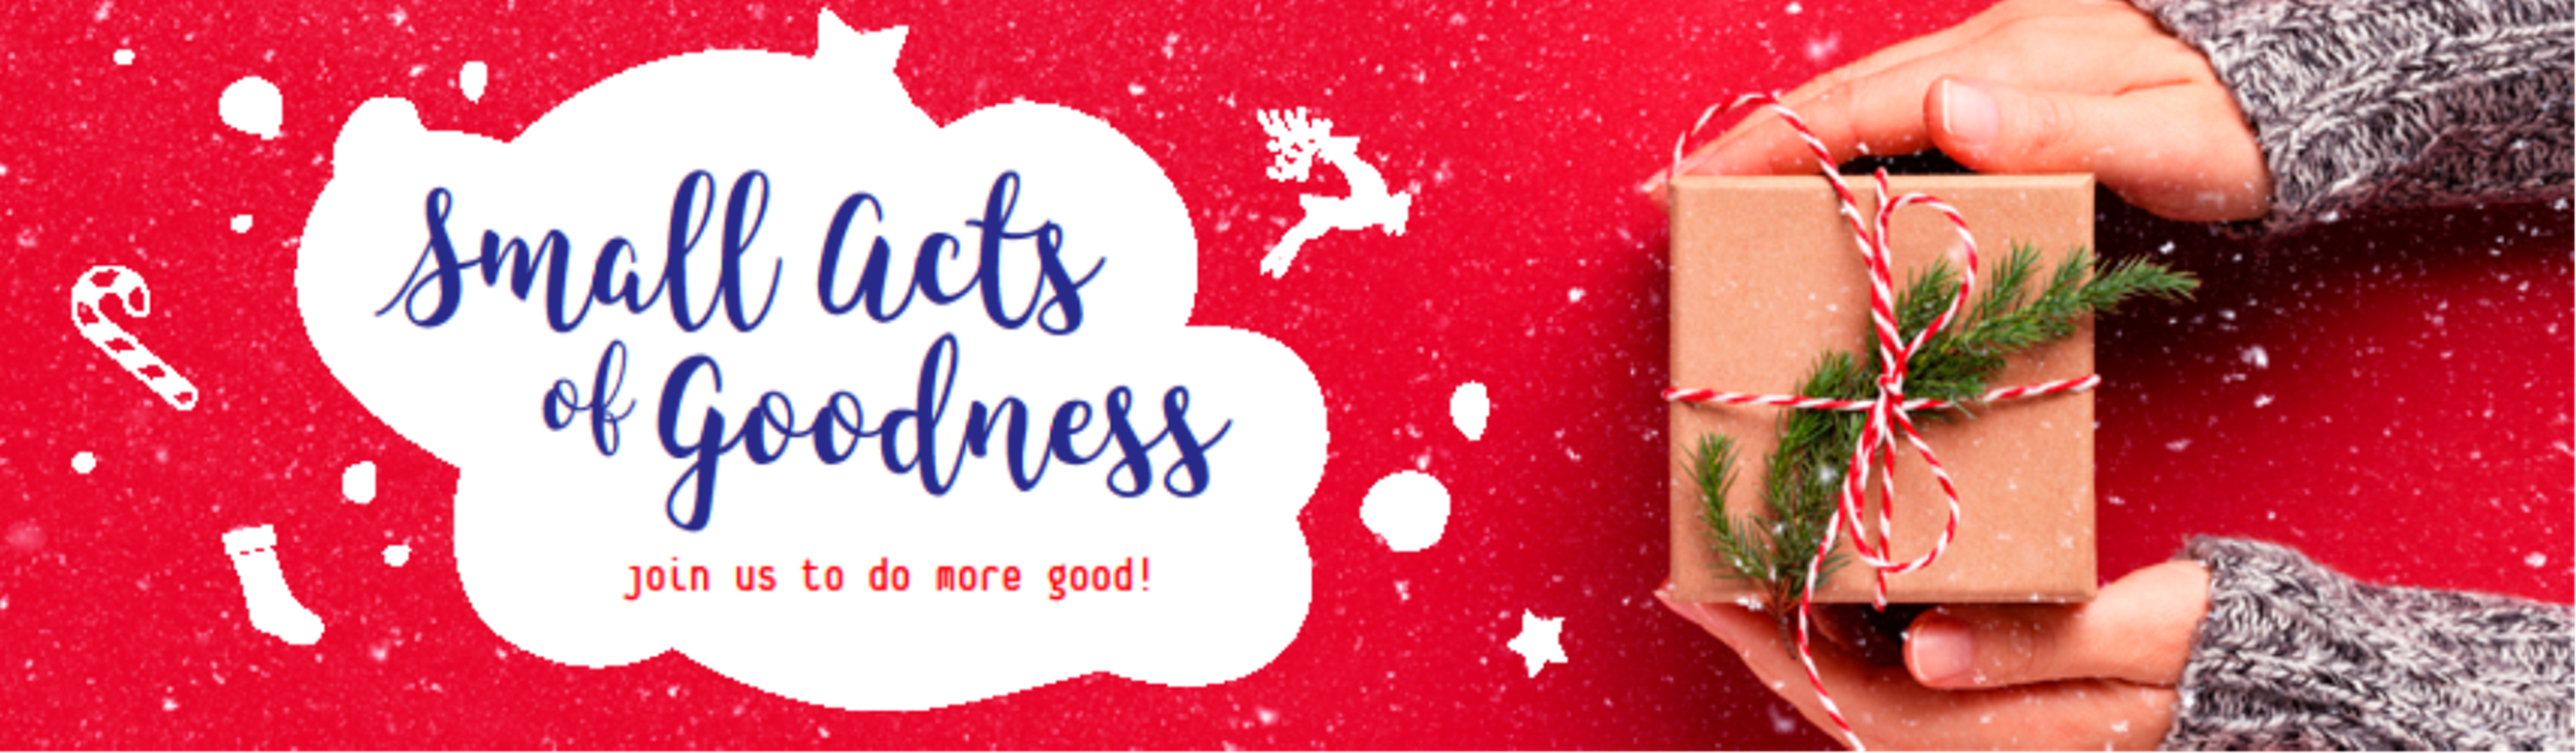 small acts of goodness banner.png